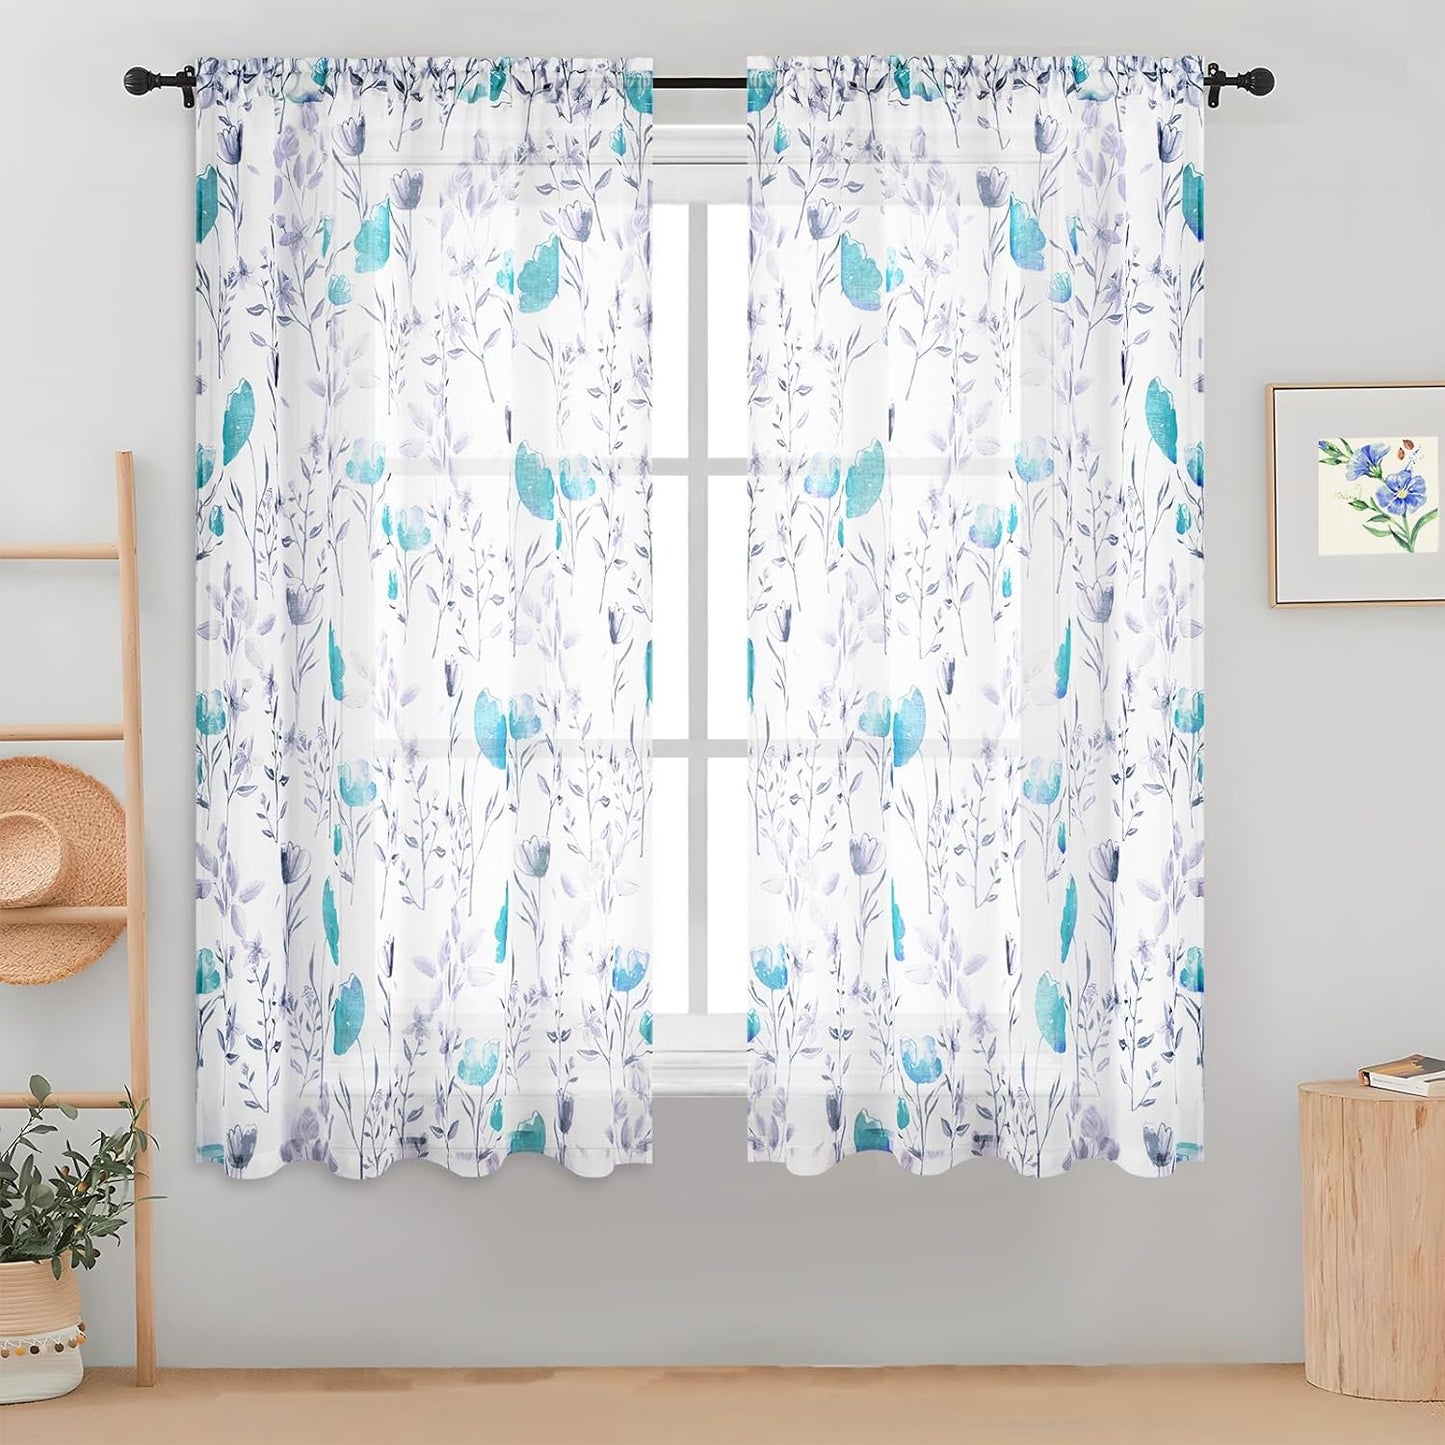 Likiyol Floral Kithchen Curtains 36 Inch Watercolor Flower Leaves Tier Curtains, Yellow and Gray Floral Cafe Curtains, Rod Pocket Small Window Curtain for Cafe Bathroom Bedroom Drapes  Likiyol Teal Sheer 63"L X 52"W 